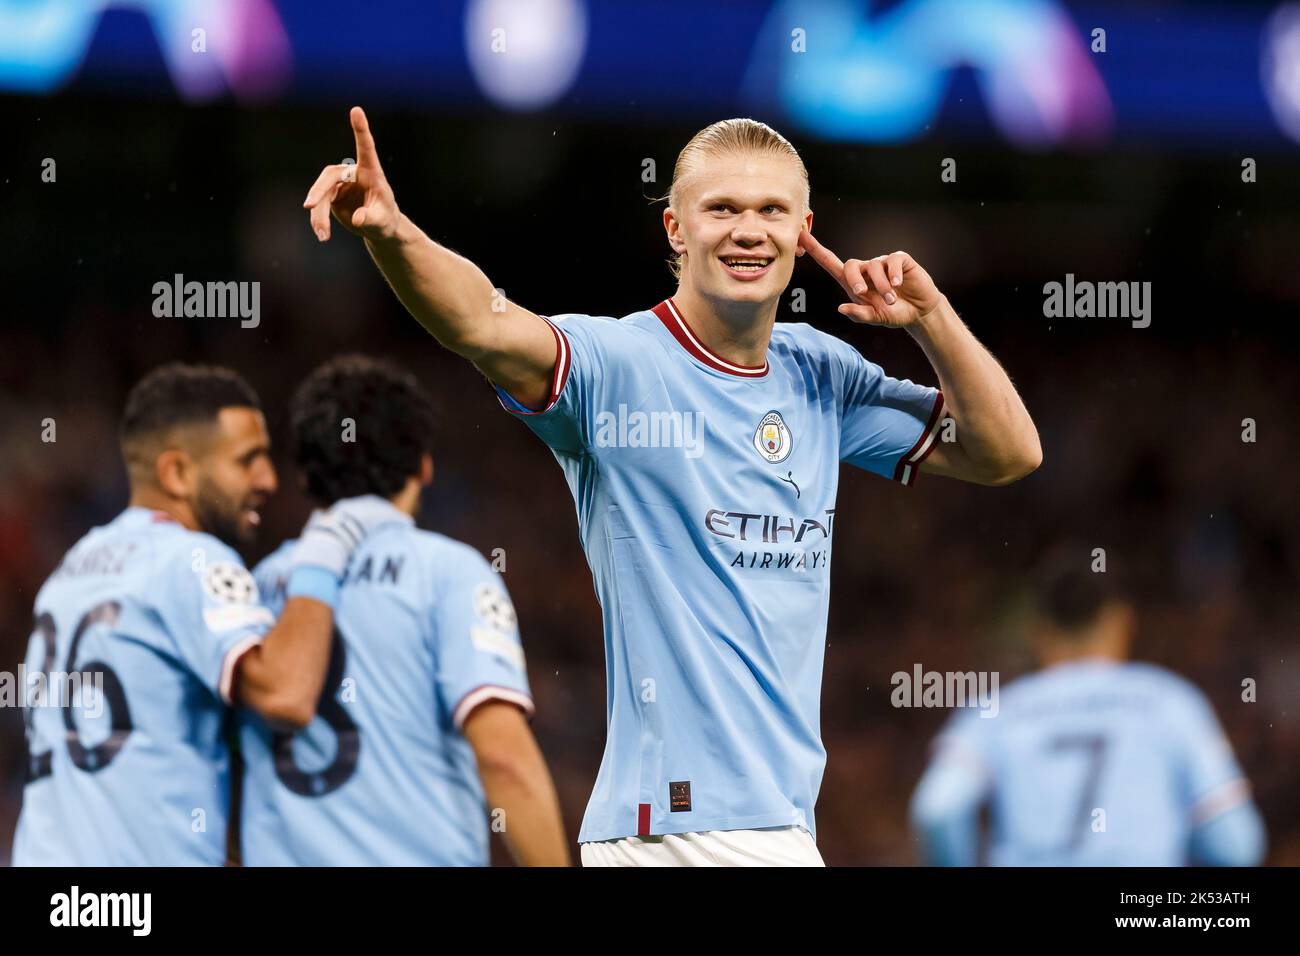 Manchester, UK. 05th Oct, 2022. Erling Haland of Manchester City celebrates after scoring their first goal to make the score 1-0 during the UEFA Champions League Group G match between Manchester City and FC Copenhagen at the Etihad Stadium on October 5th 2022 in Manchester, England. (Photo by Daniel Chesterton/phcimages.com) Credit: PHC Images/Alamy Live News Stock Photo